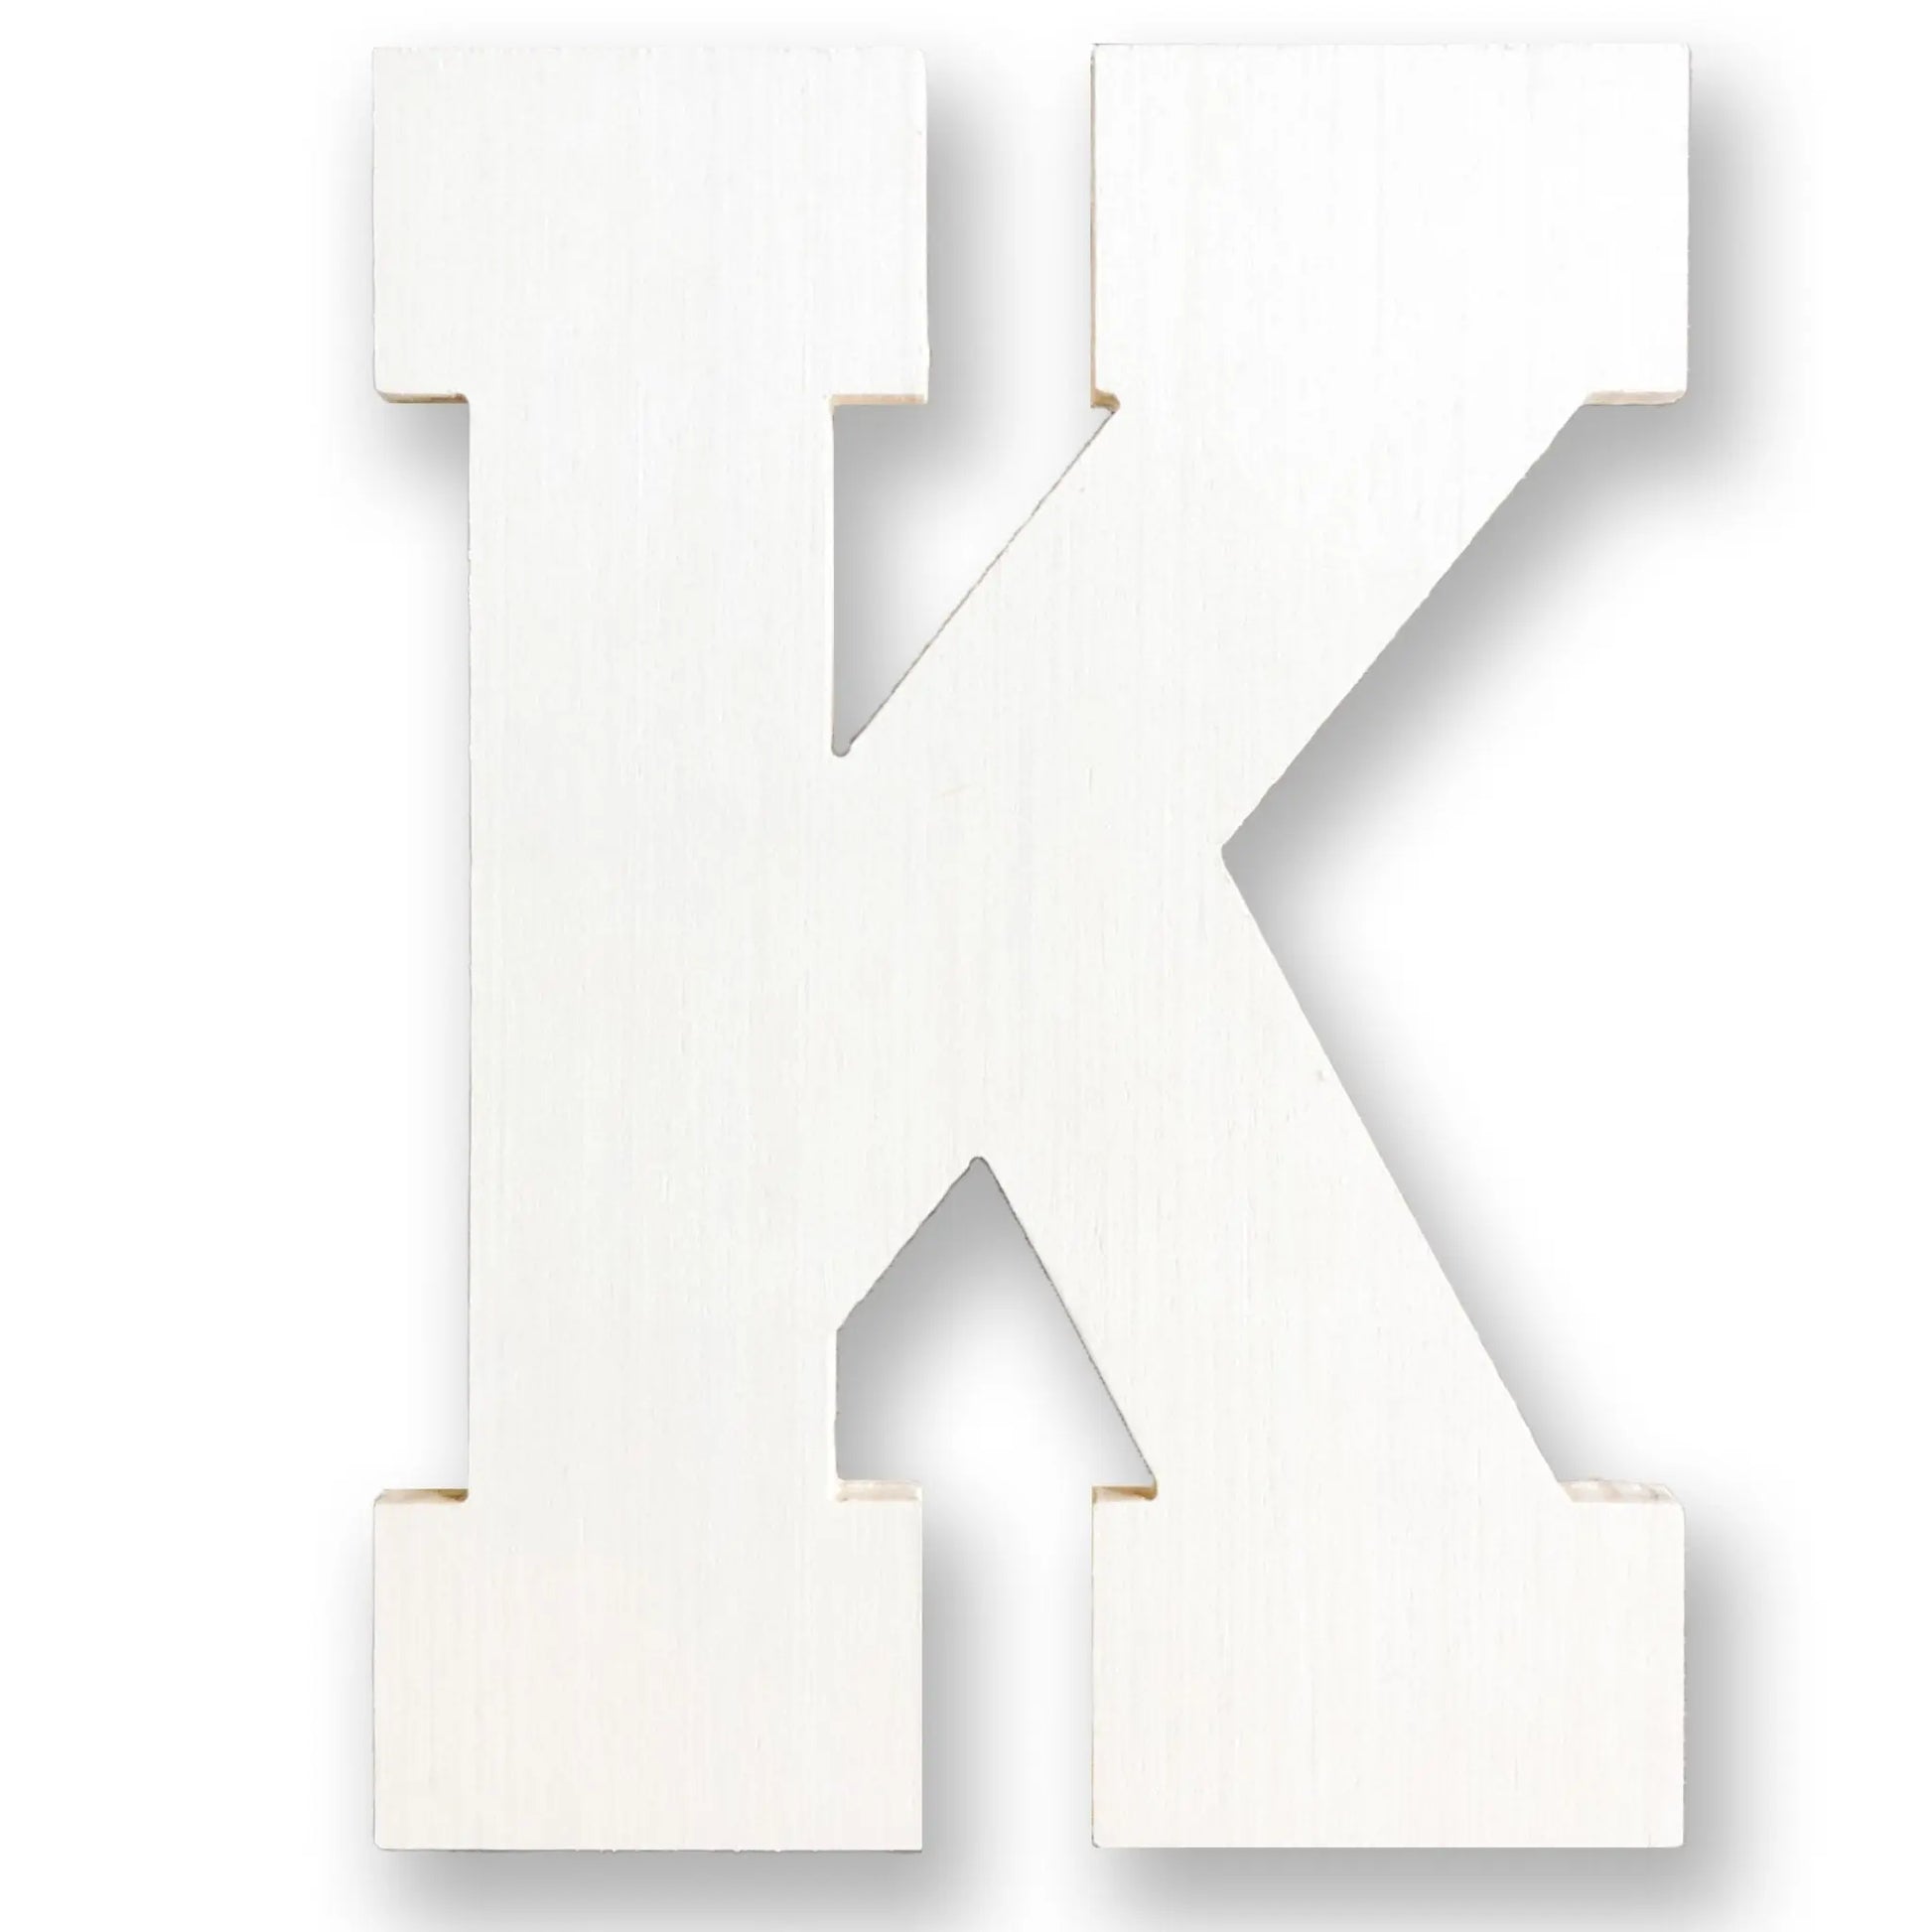 Wood Letters - 3/4 Inch Regular Wood Letters or Numbers